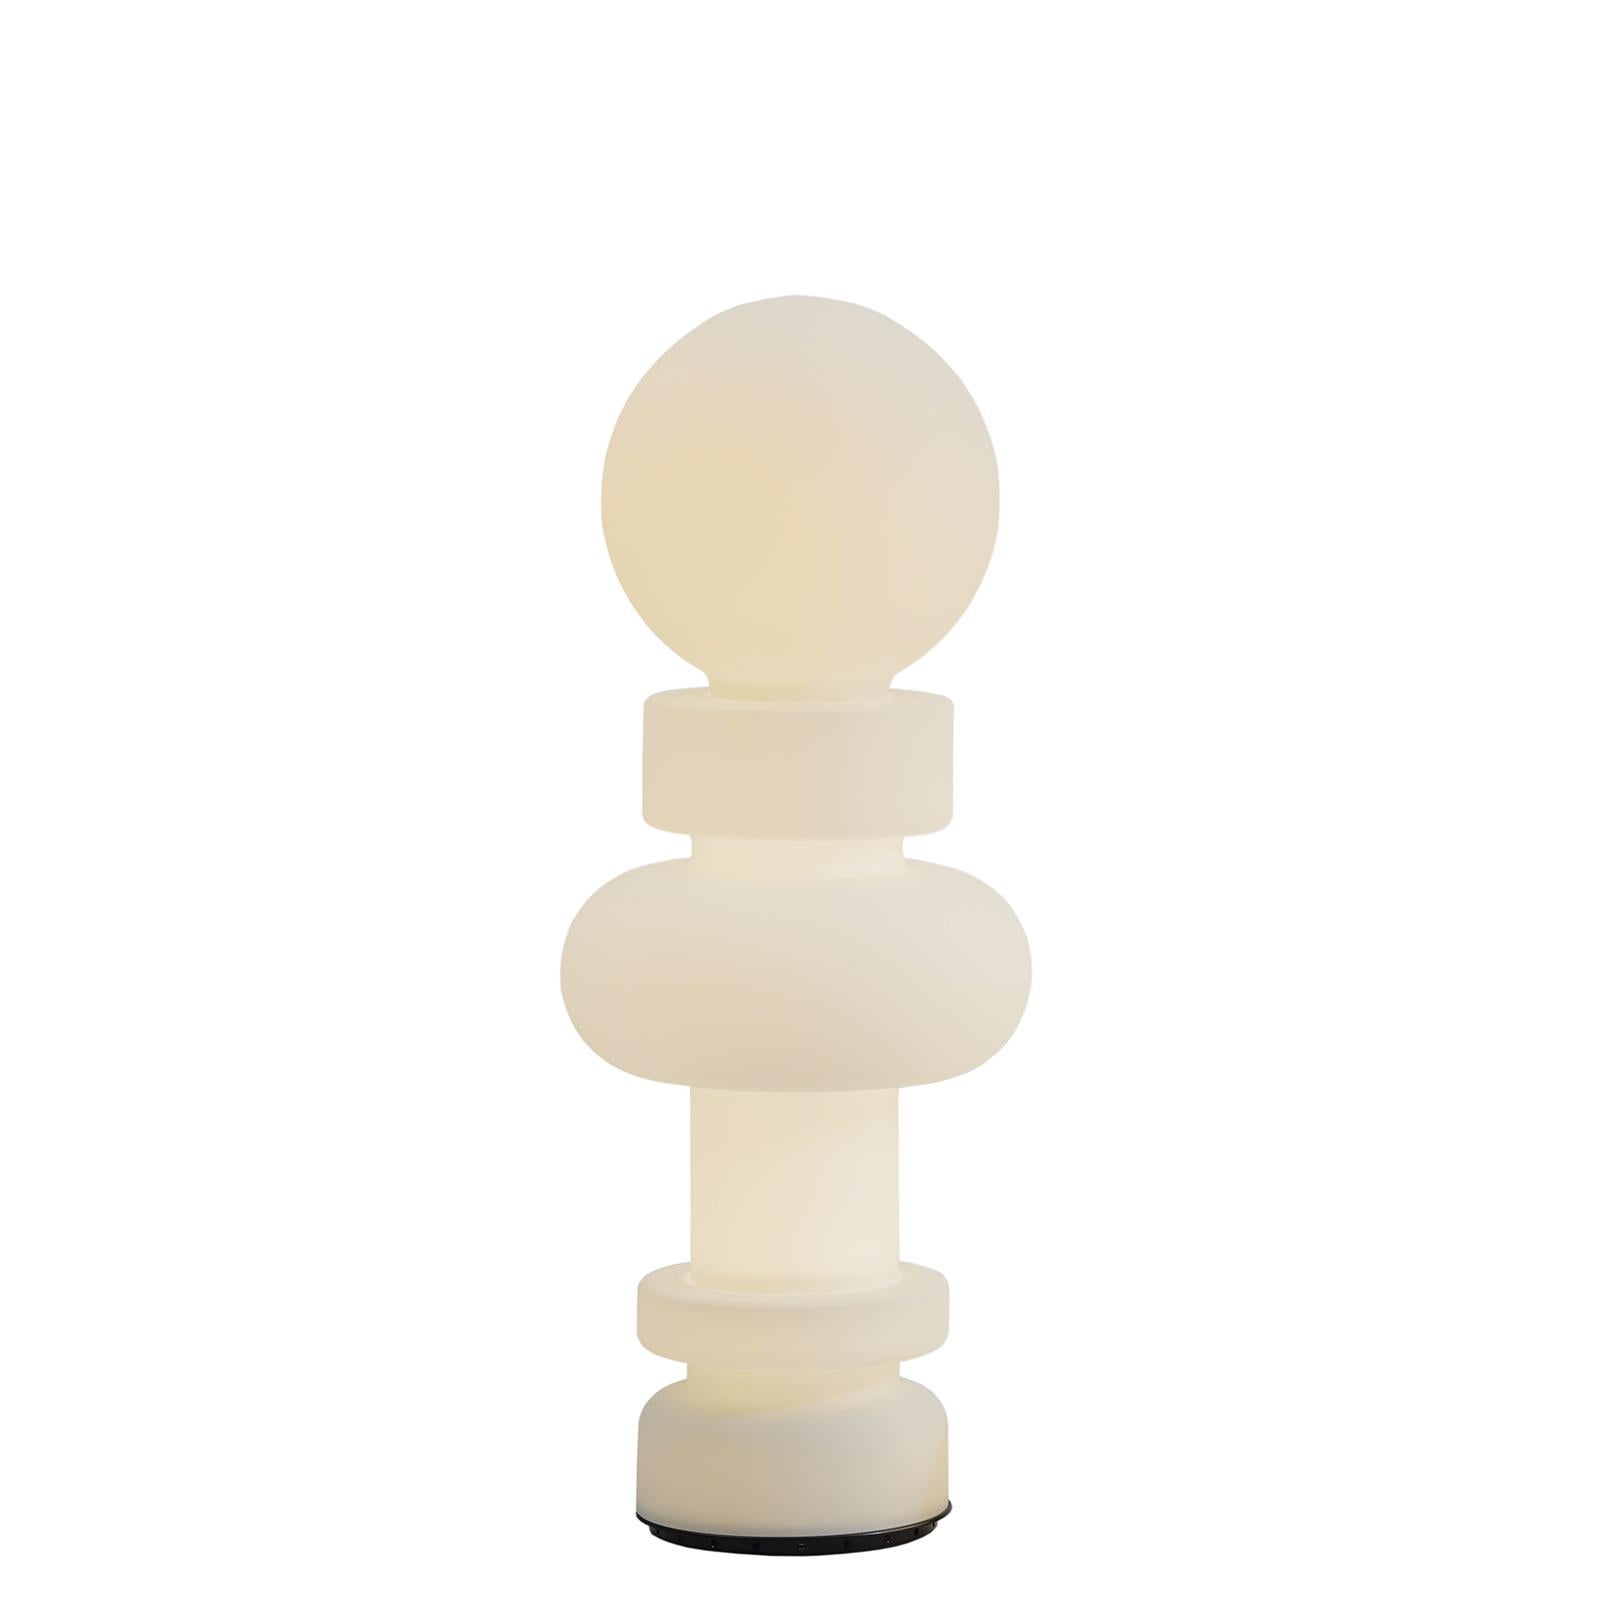 Inspired by the game of chess with their sinuous shapes, Re and Regina are the key characters of the chessboard. Their profiles stand out clearly in the white light diffused by opalescent glass. Real individuals, they play in pairs alternating